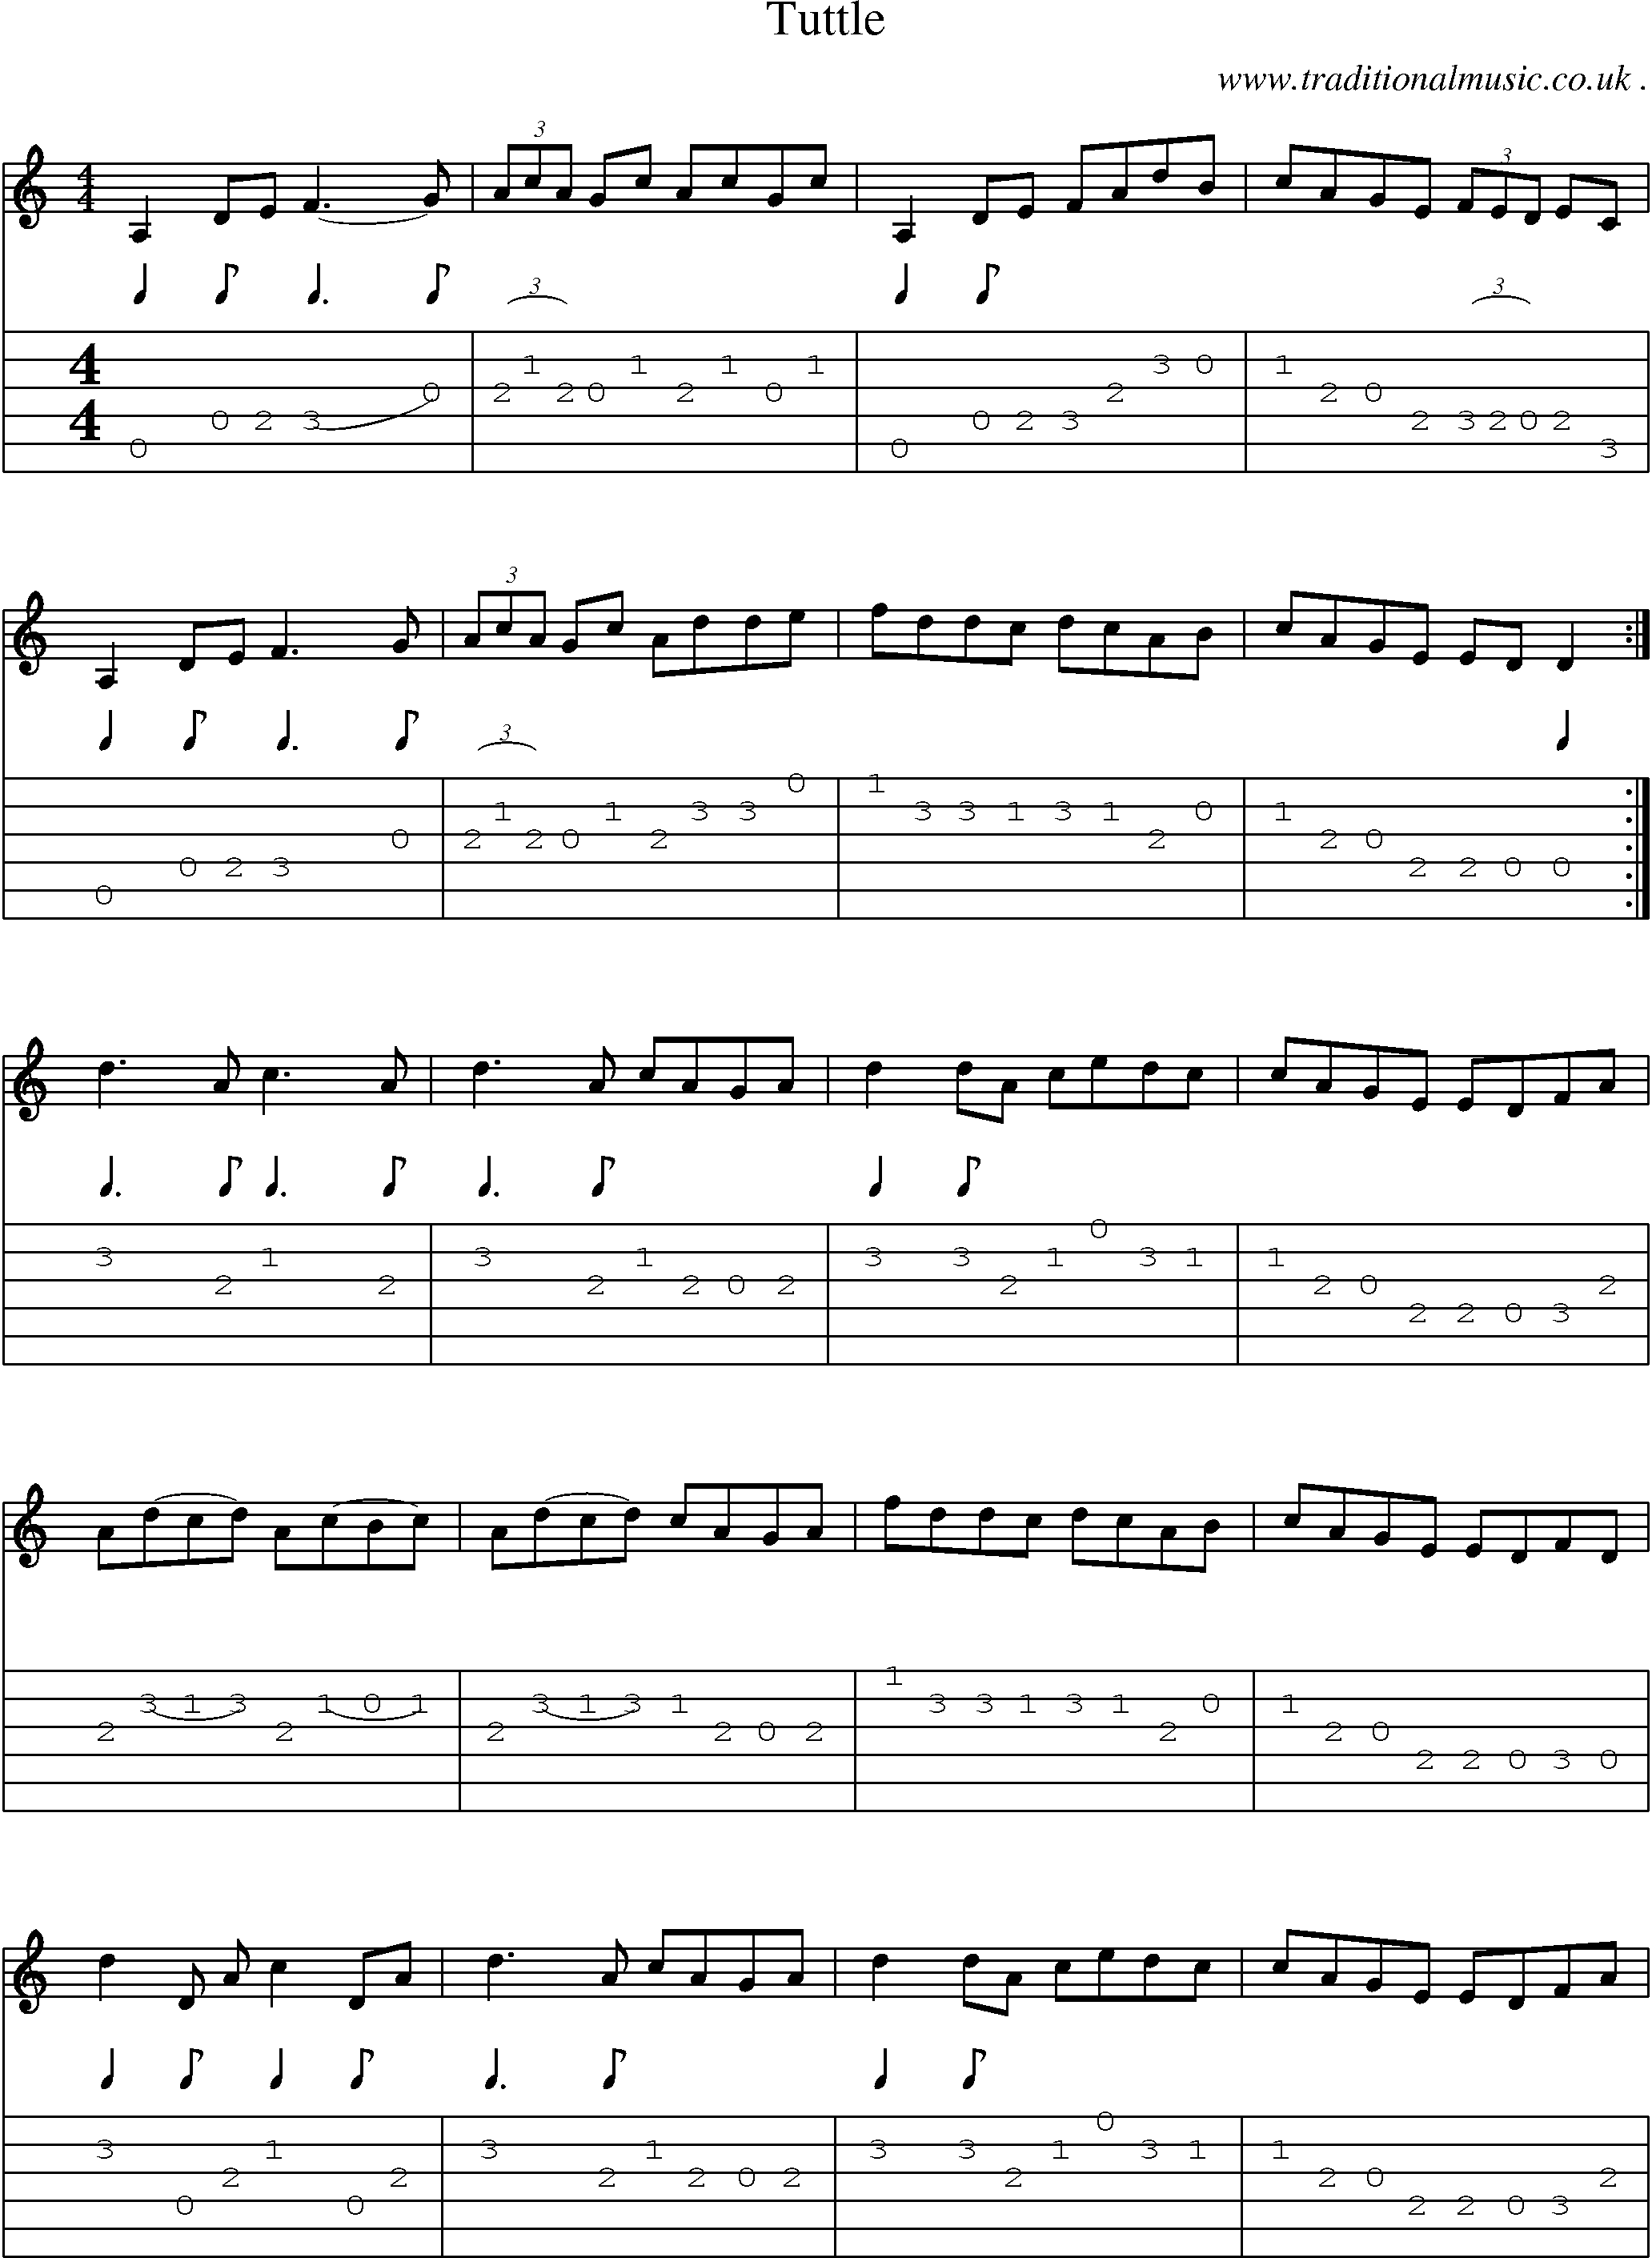 Sheet-Music and Guitar Tabs for Tuttle